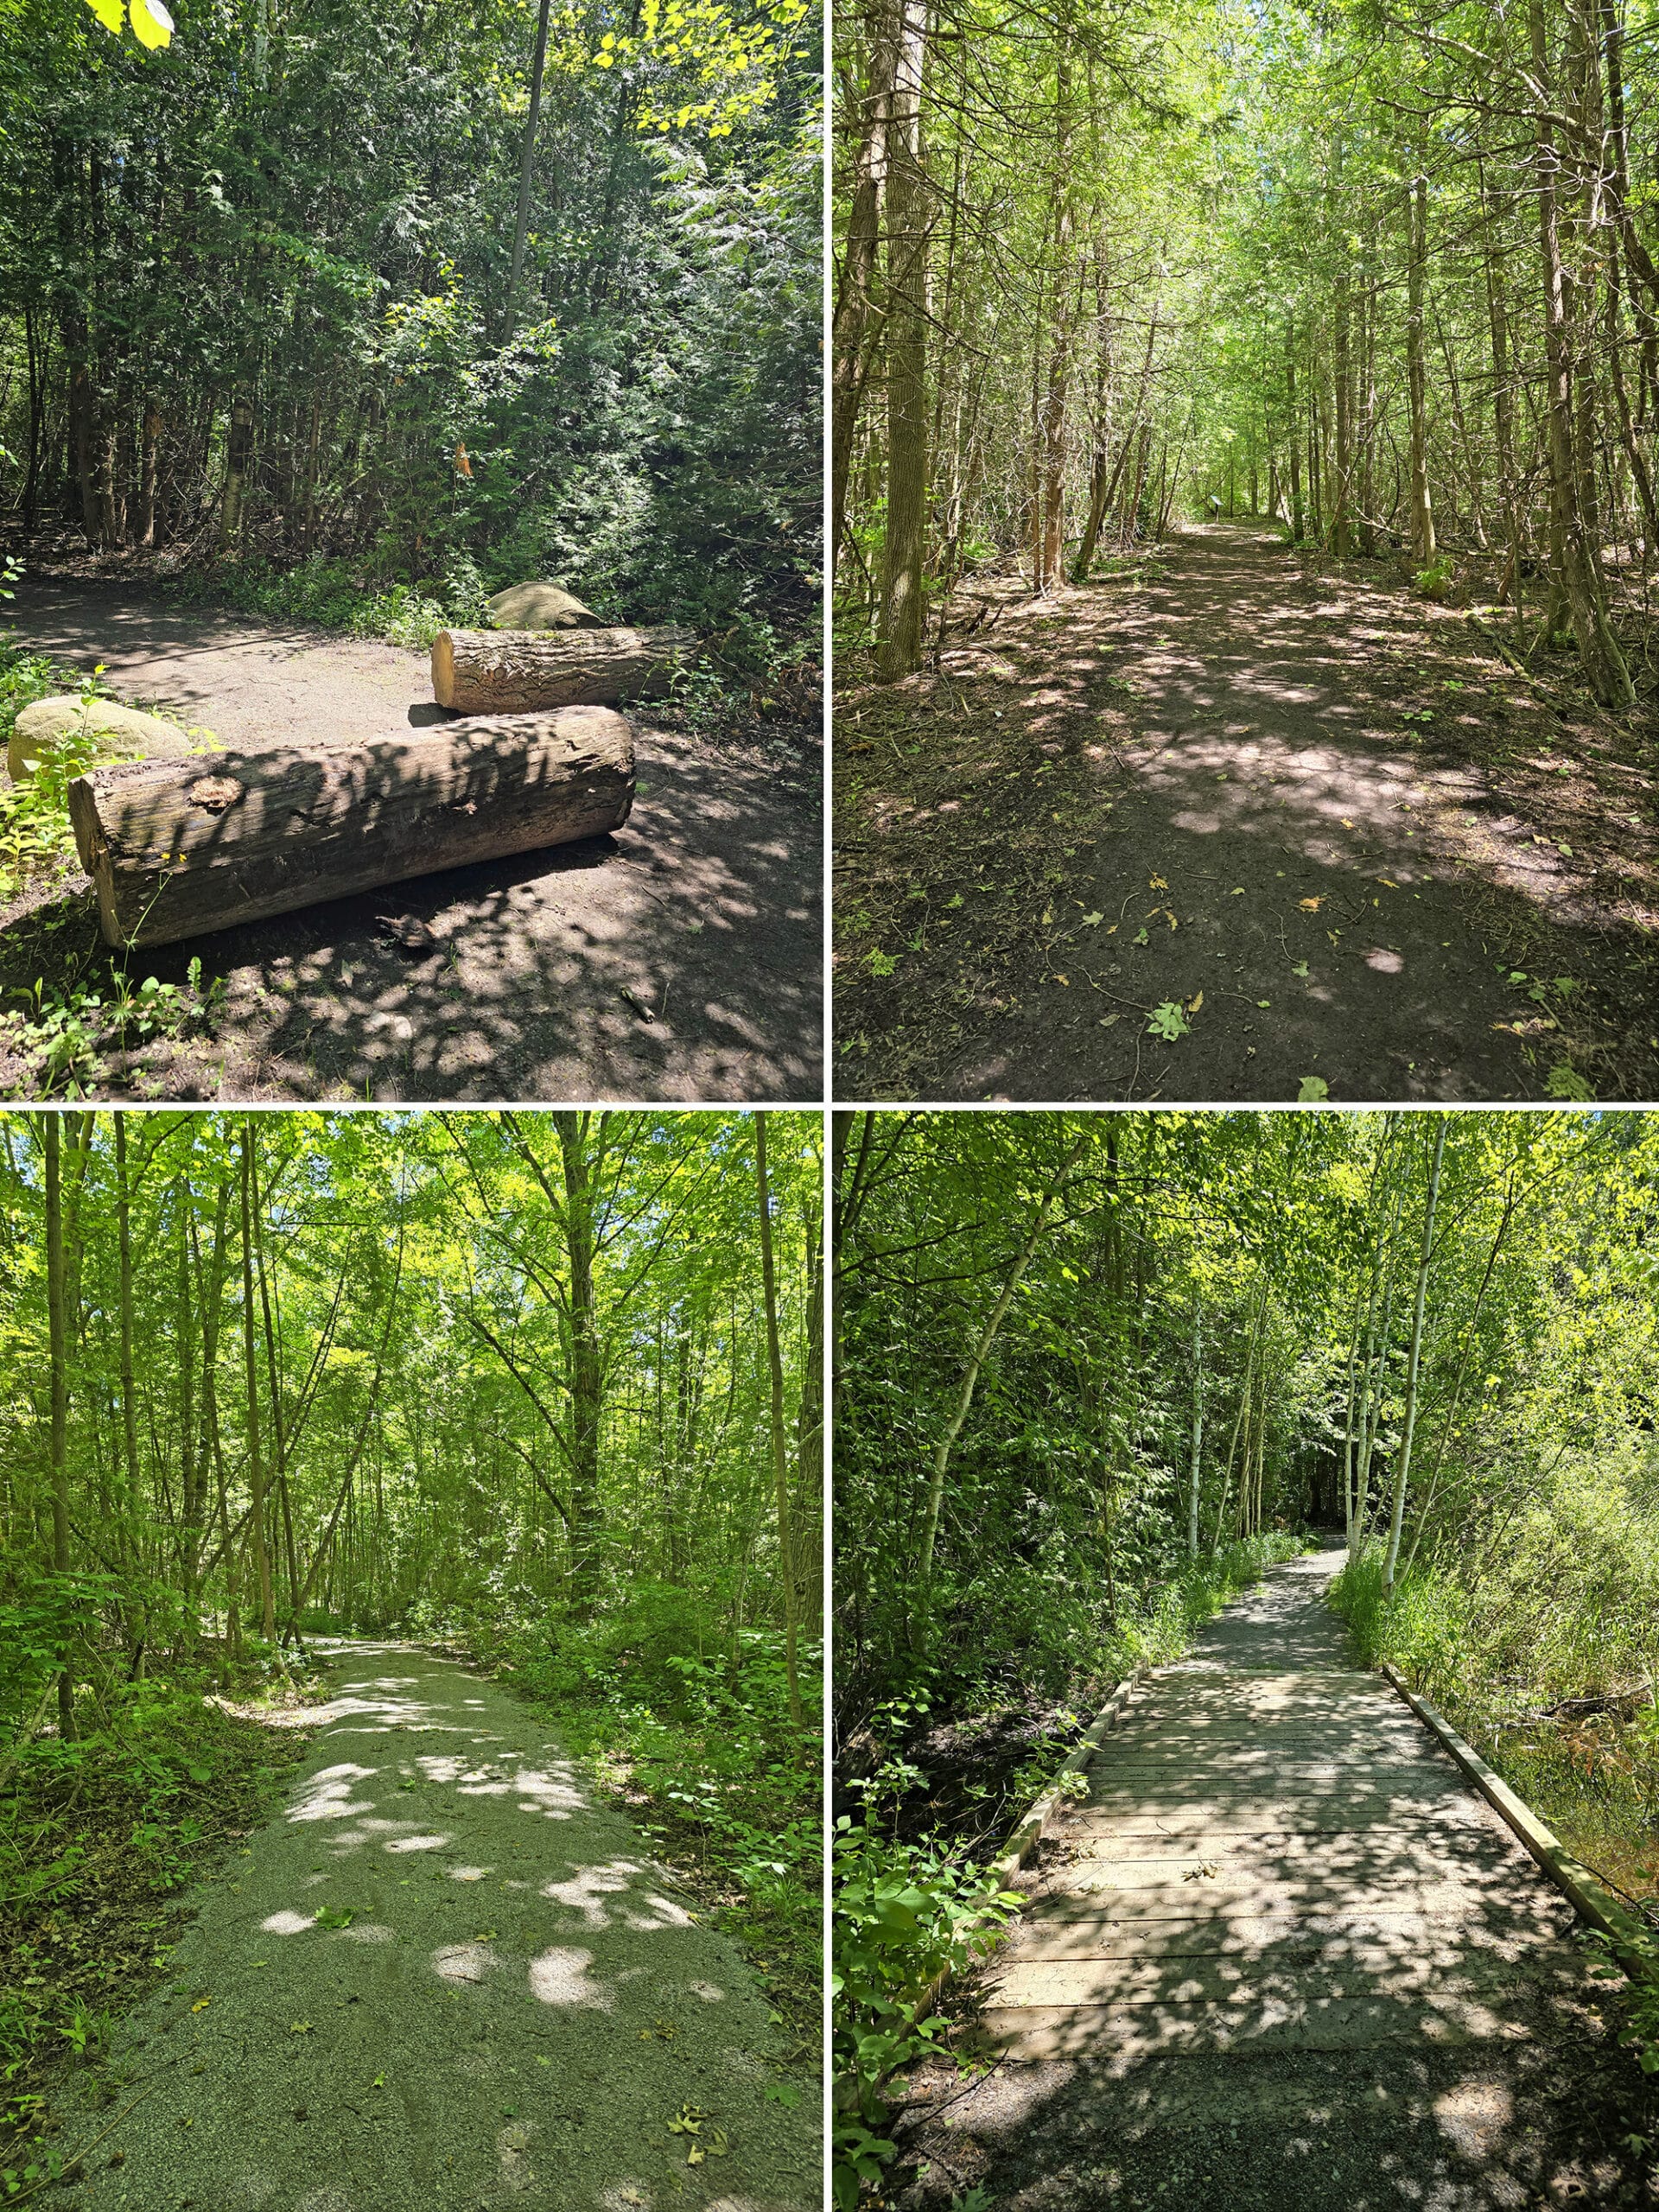 4 part image showing various views along the maidenhair fern trail at Sibbald Point Provincial Park.